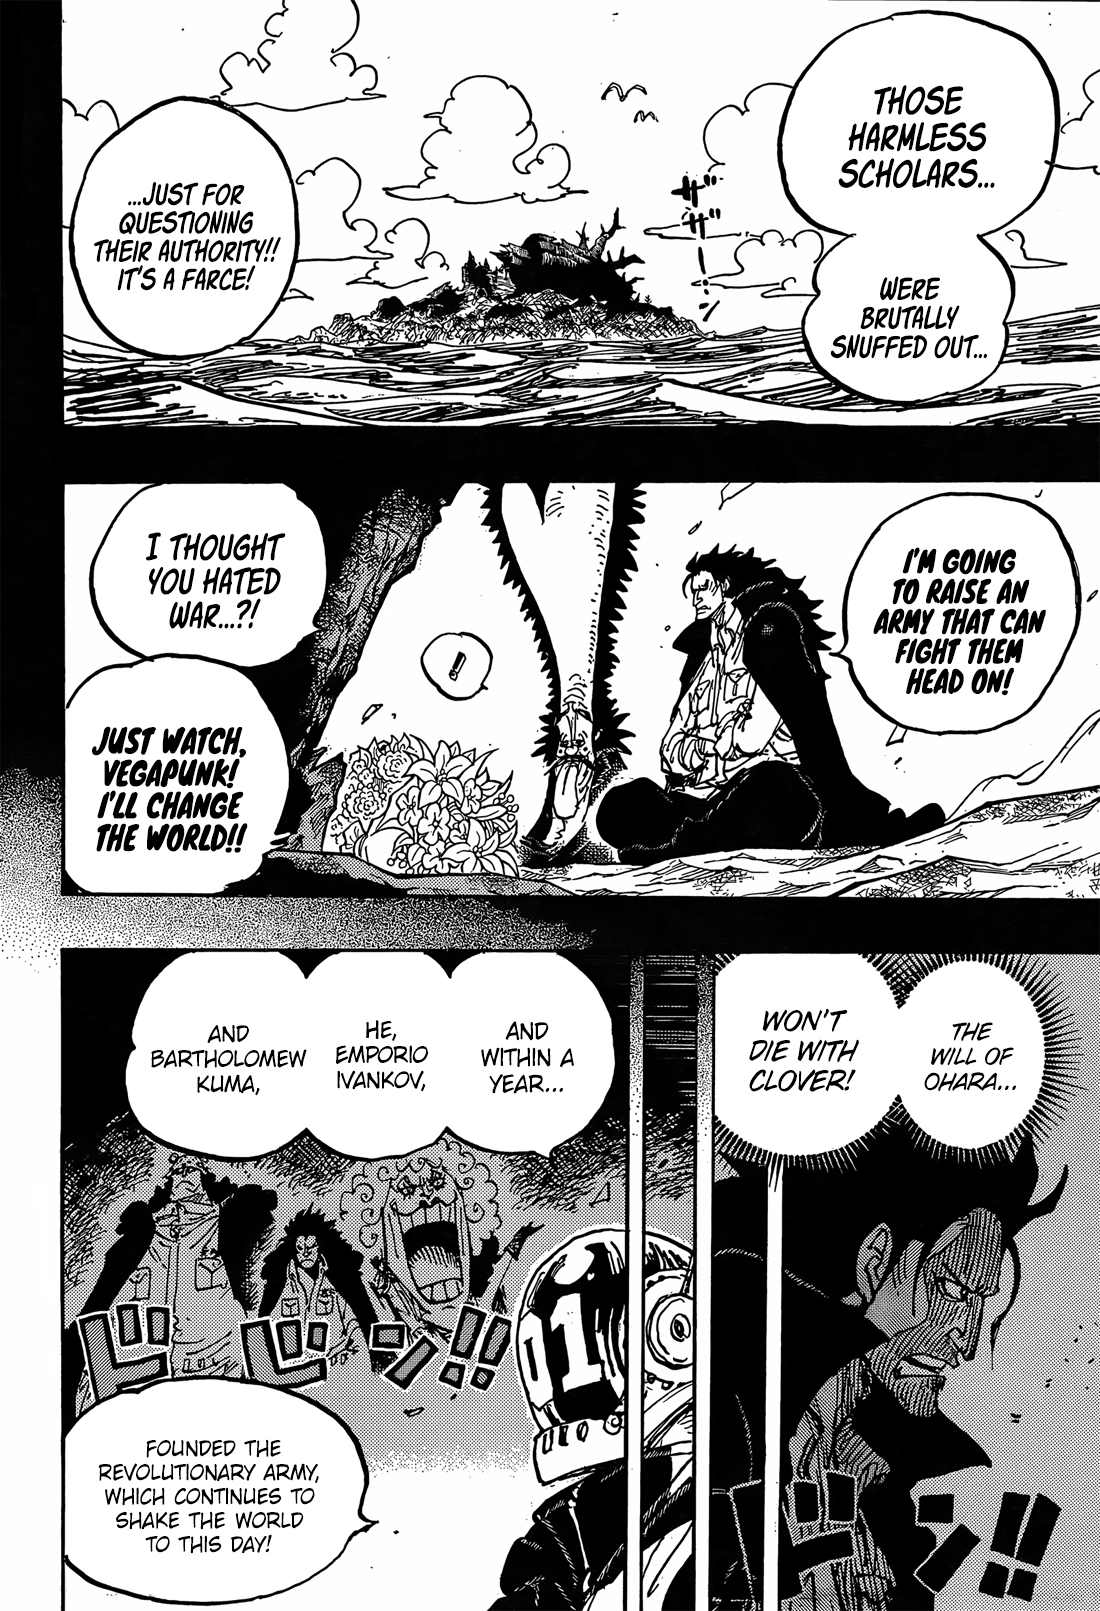 The formation of the revolutionary army - One Piece Chapter 1066